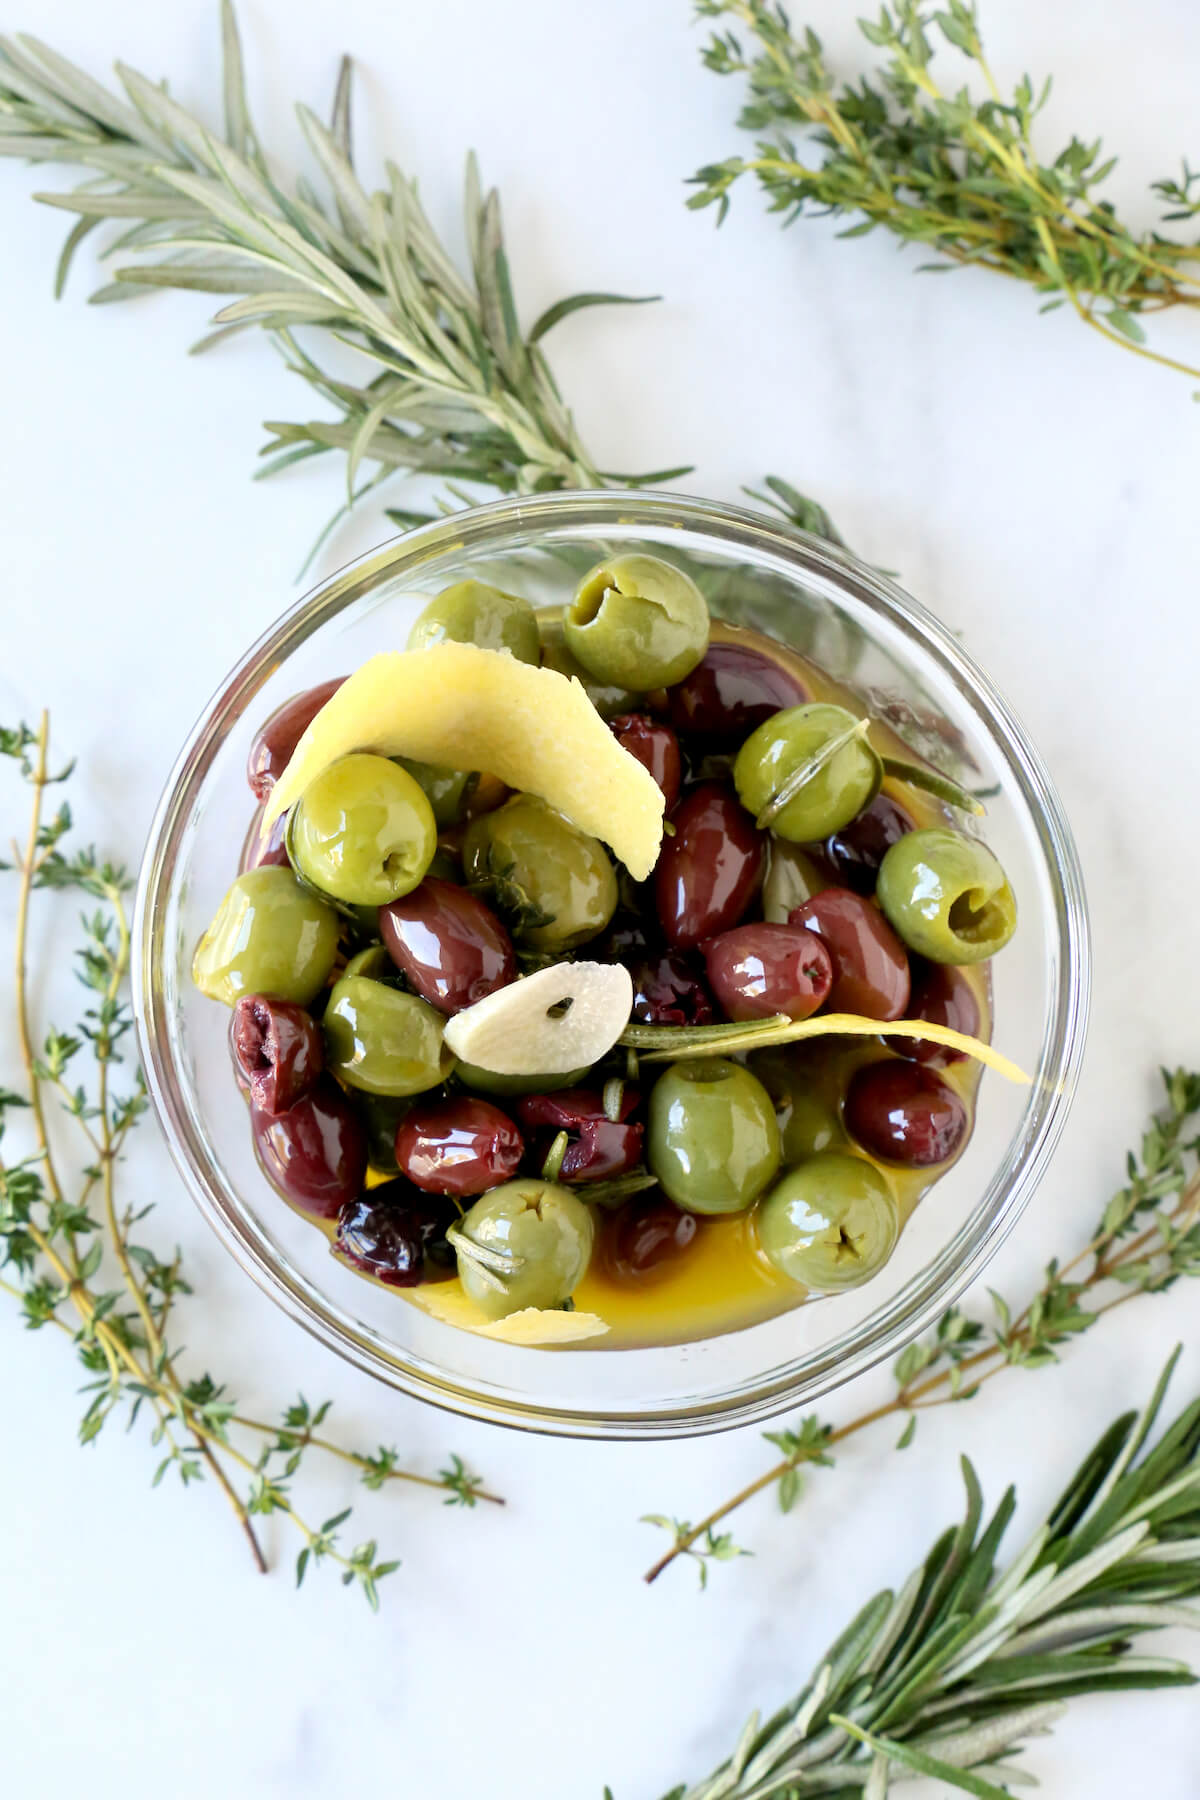 A glass bowl filled with olives, lemon peel and garlic surrounded by fresh rosemary sprigs and thyme.